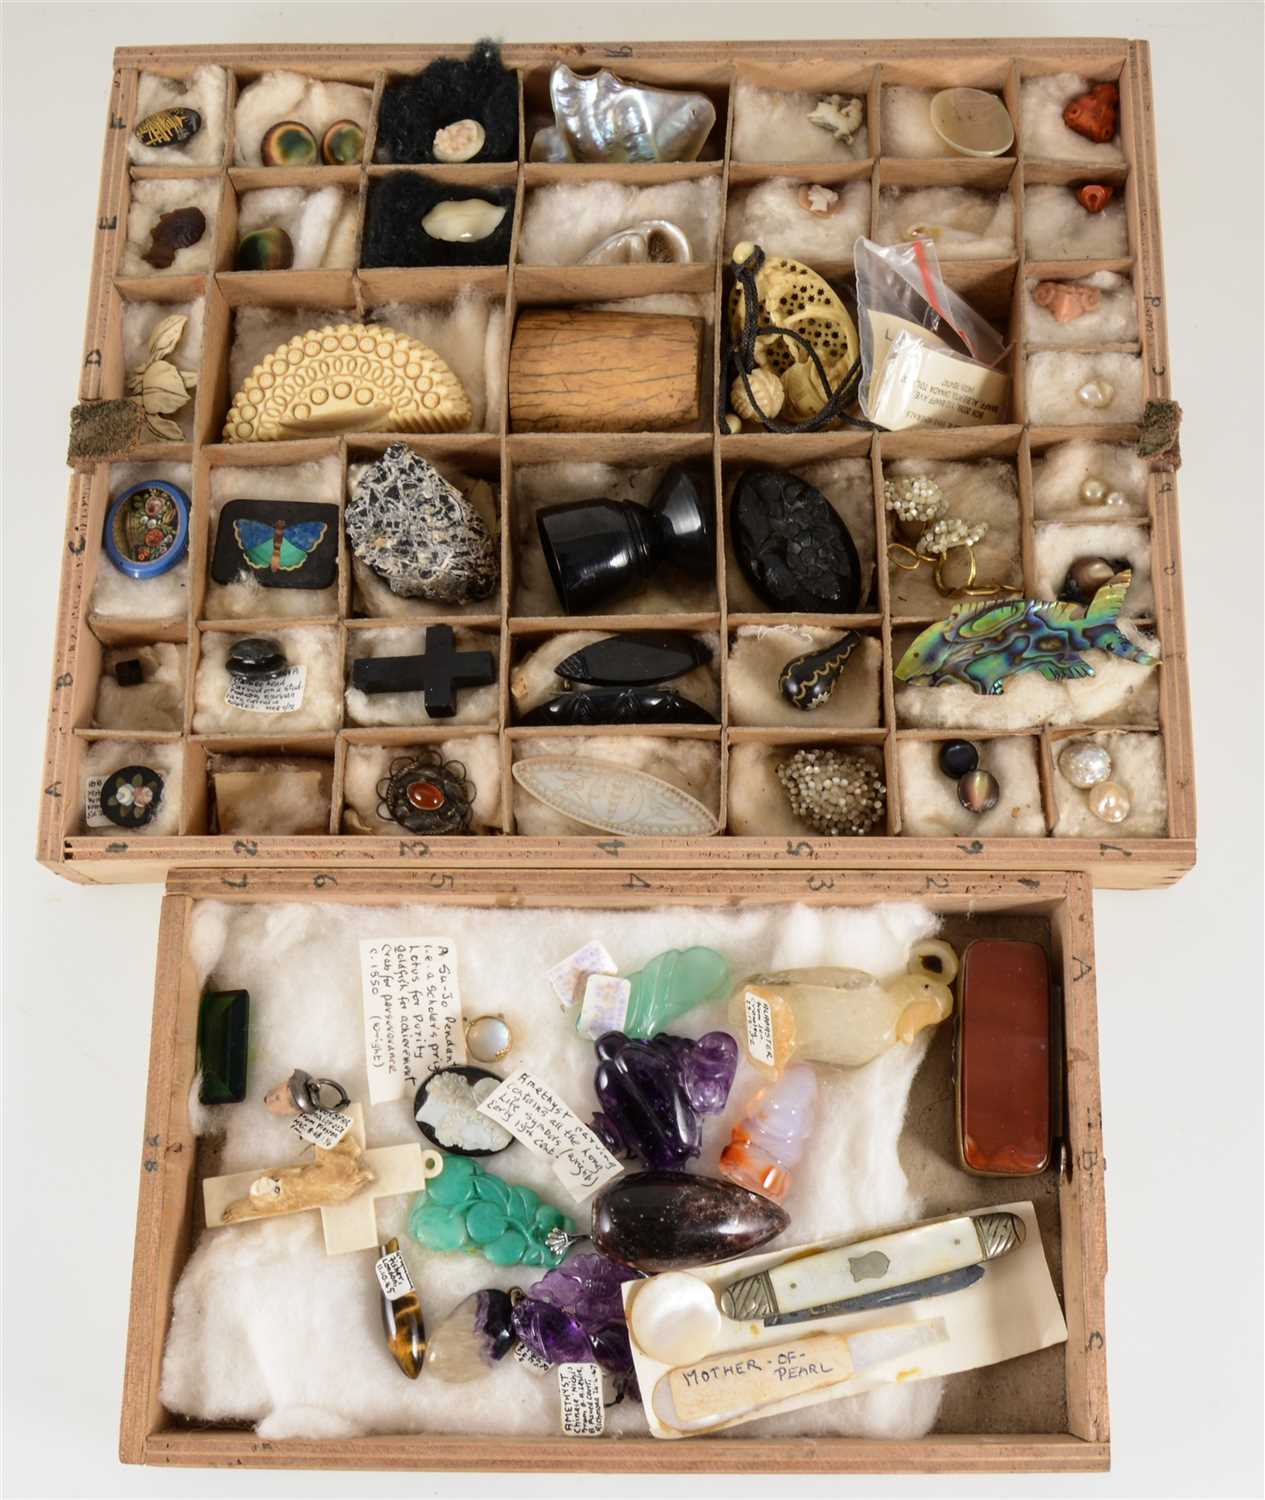 Lot 215 - A quantity of jewellery and objets d'art, including two pieces of carved amethyst, a mini mosaic, a mother-of-pearl game counter, jet brooches, a blue john pendant.